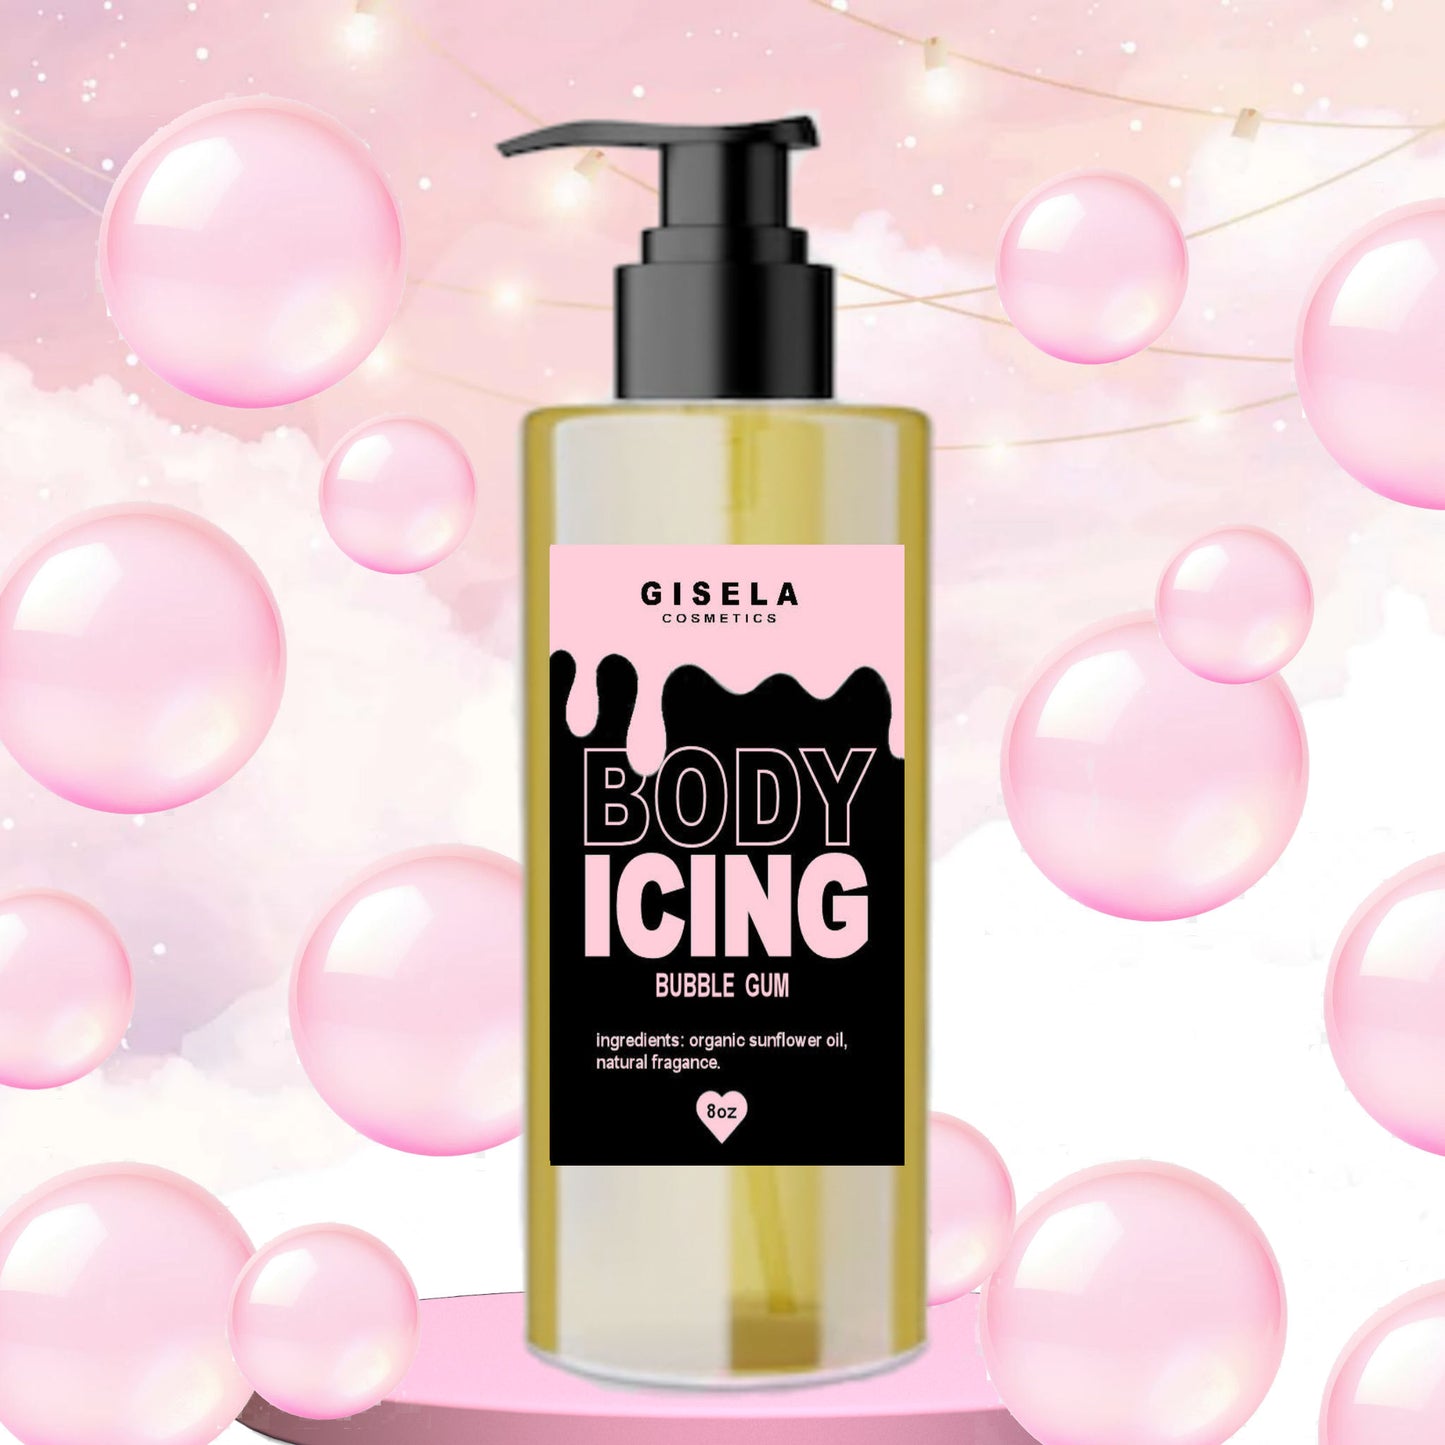 Bubble Gum┃ Body Icing